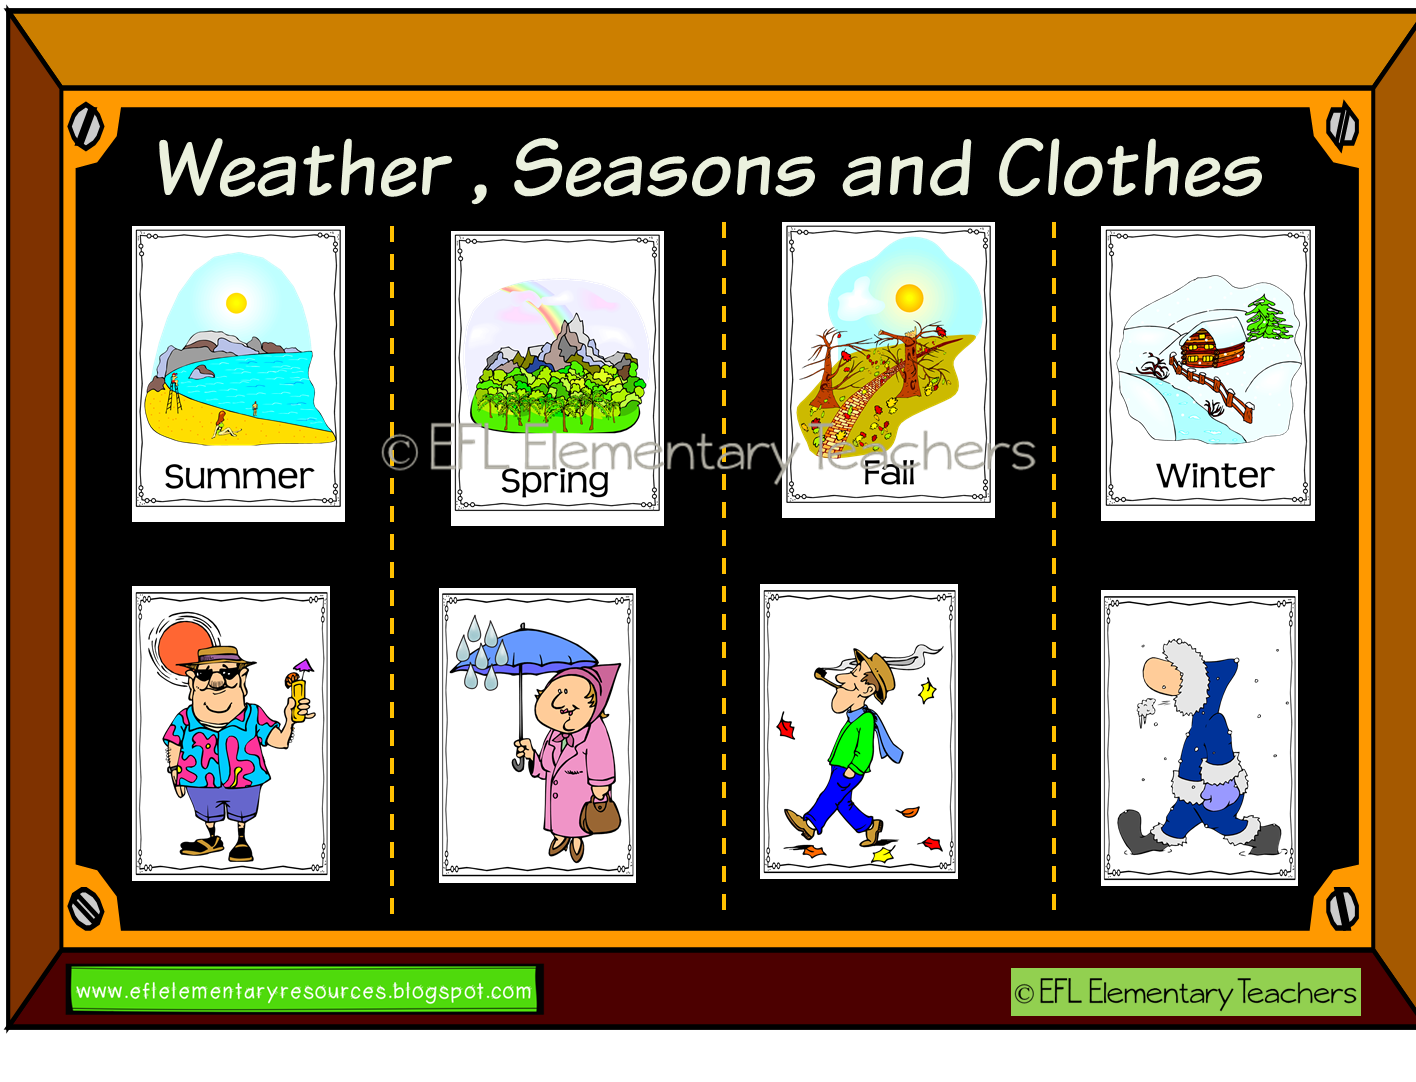 Seasons activities. Clothes and weather карточки. Seasons and clothes. Weather and the Seasons.